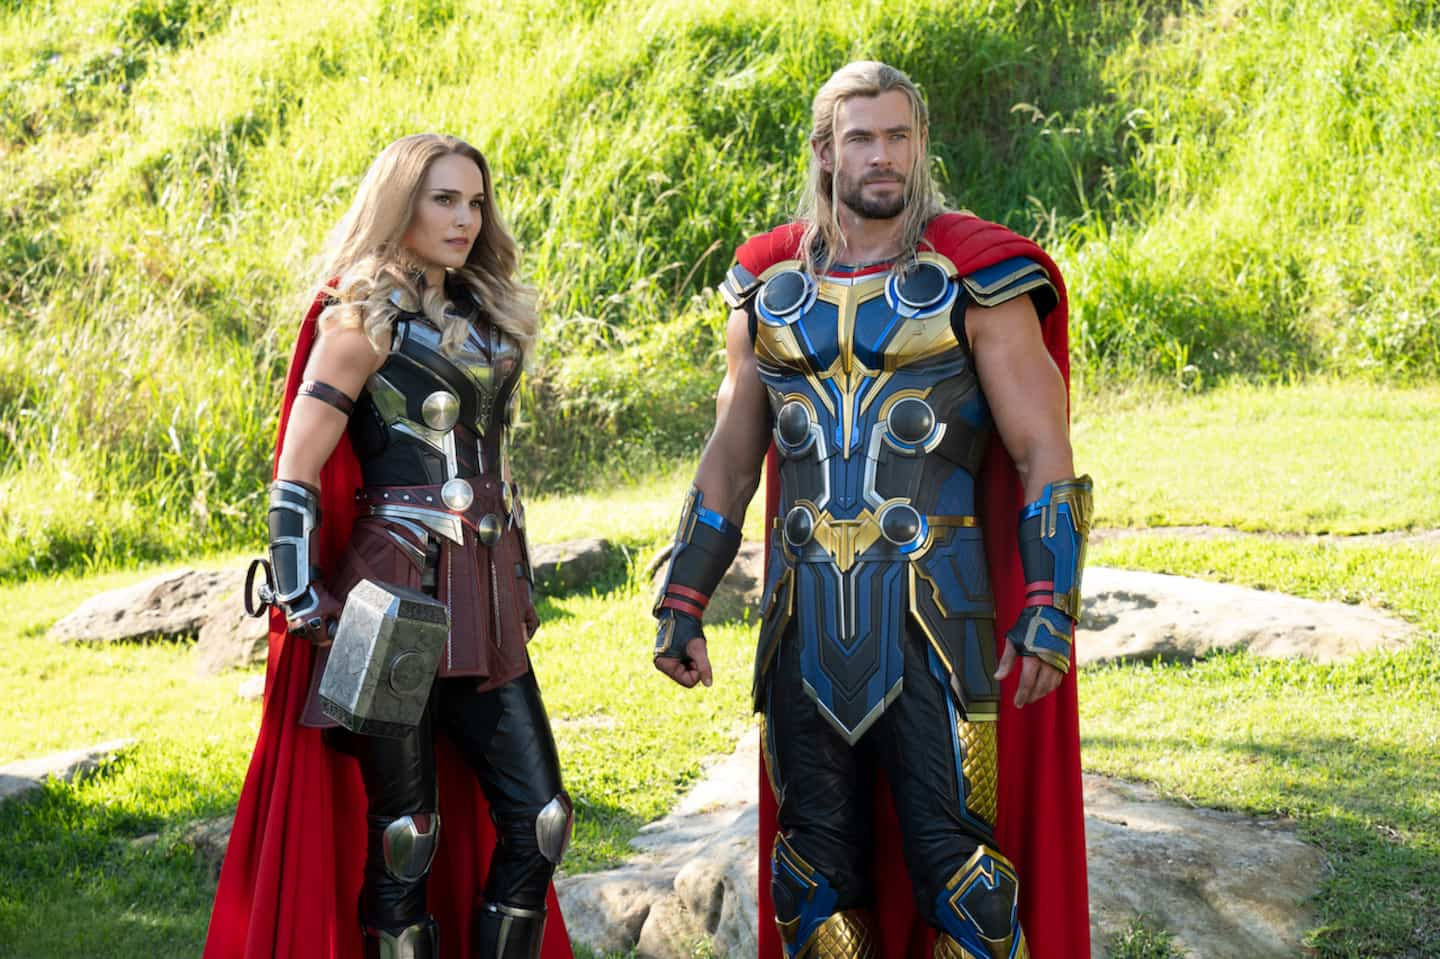 "Thor: love and thunder": color, action... and Natalie Portman